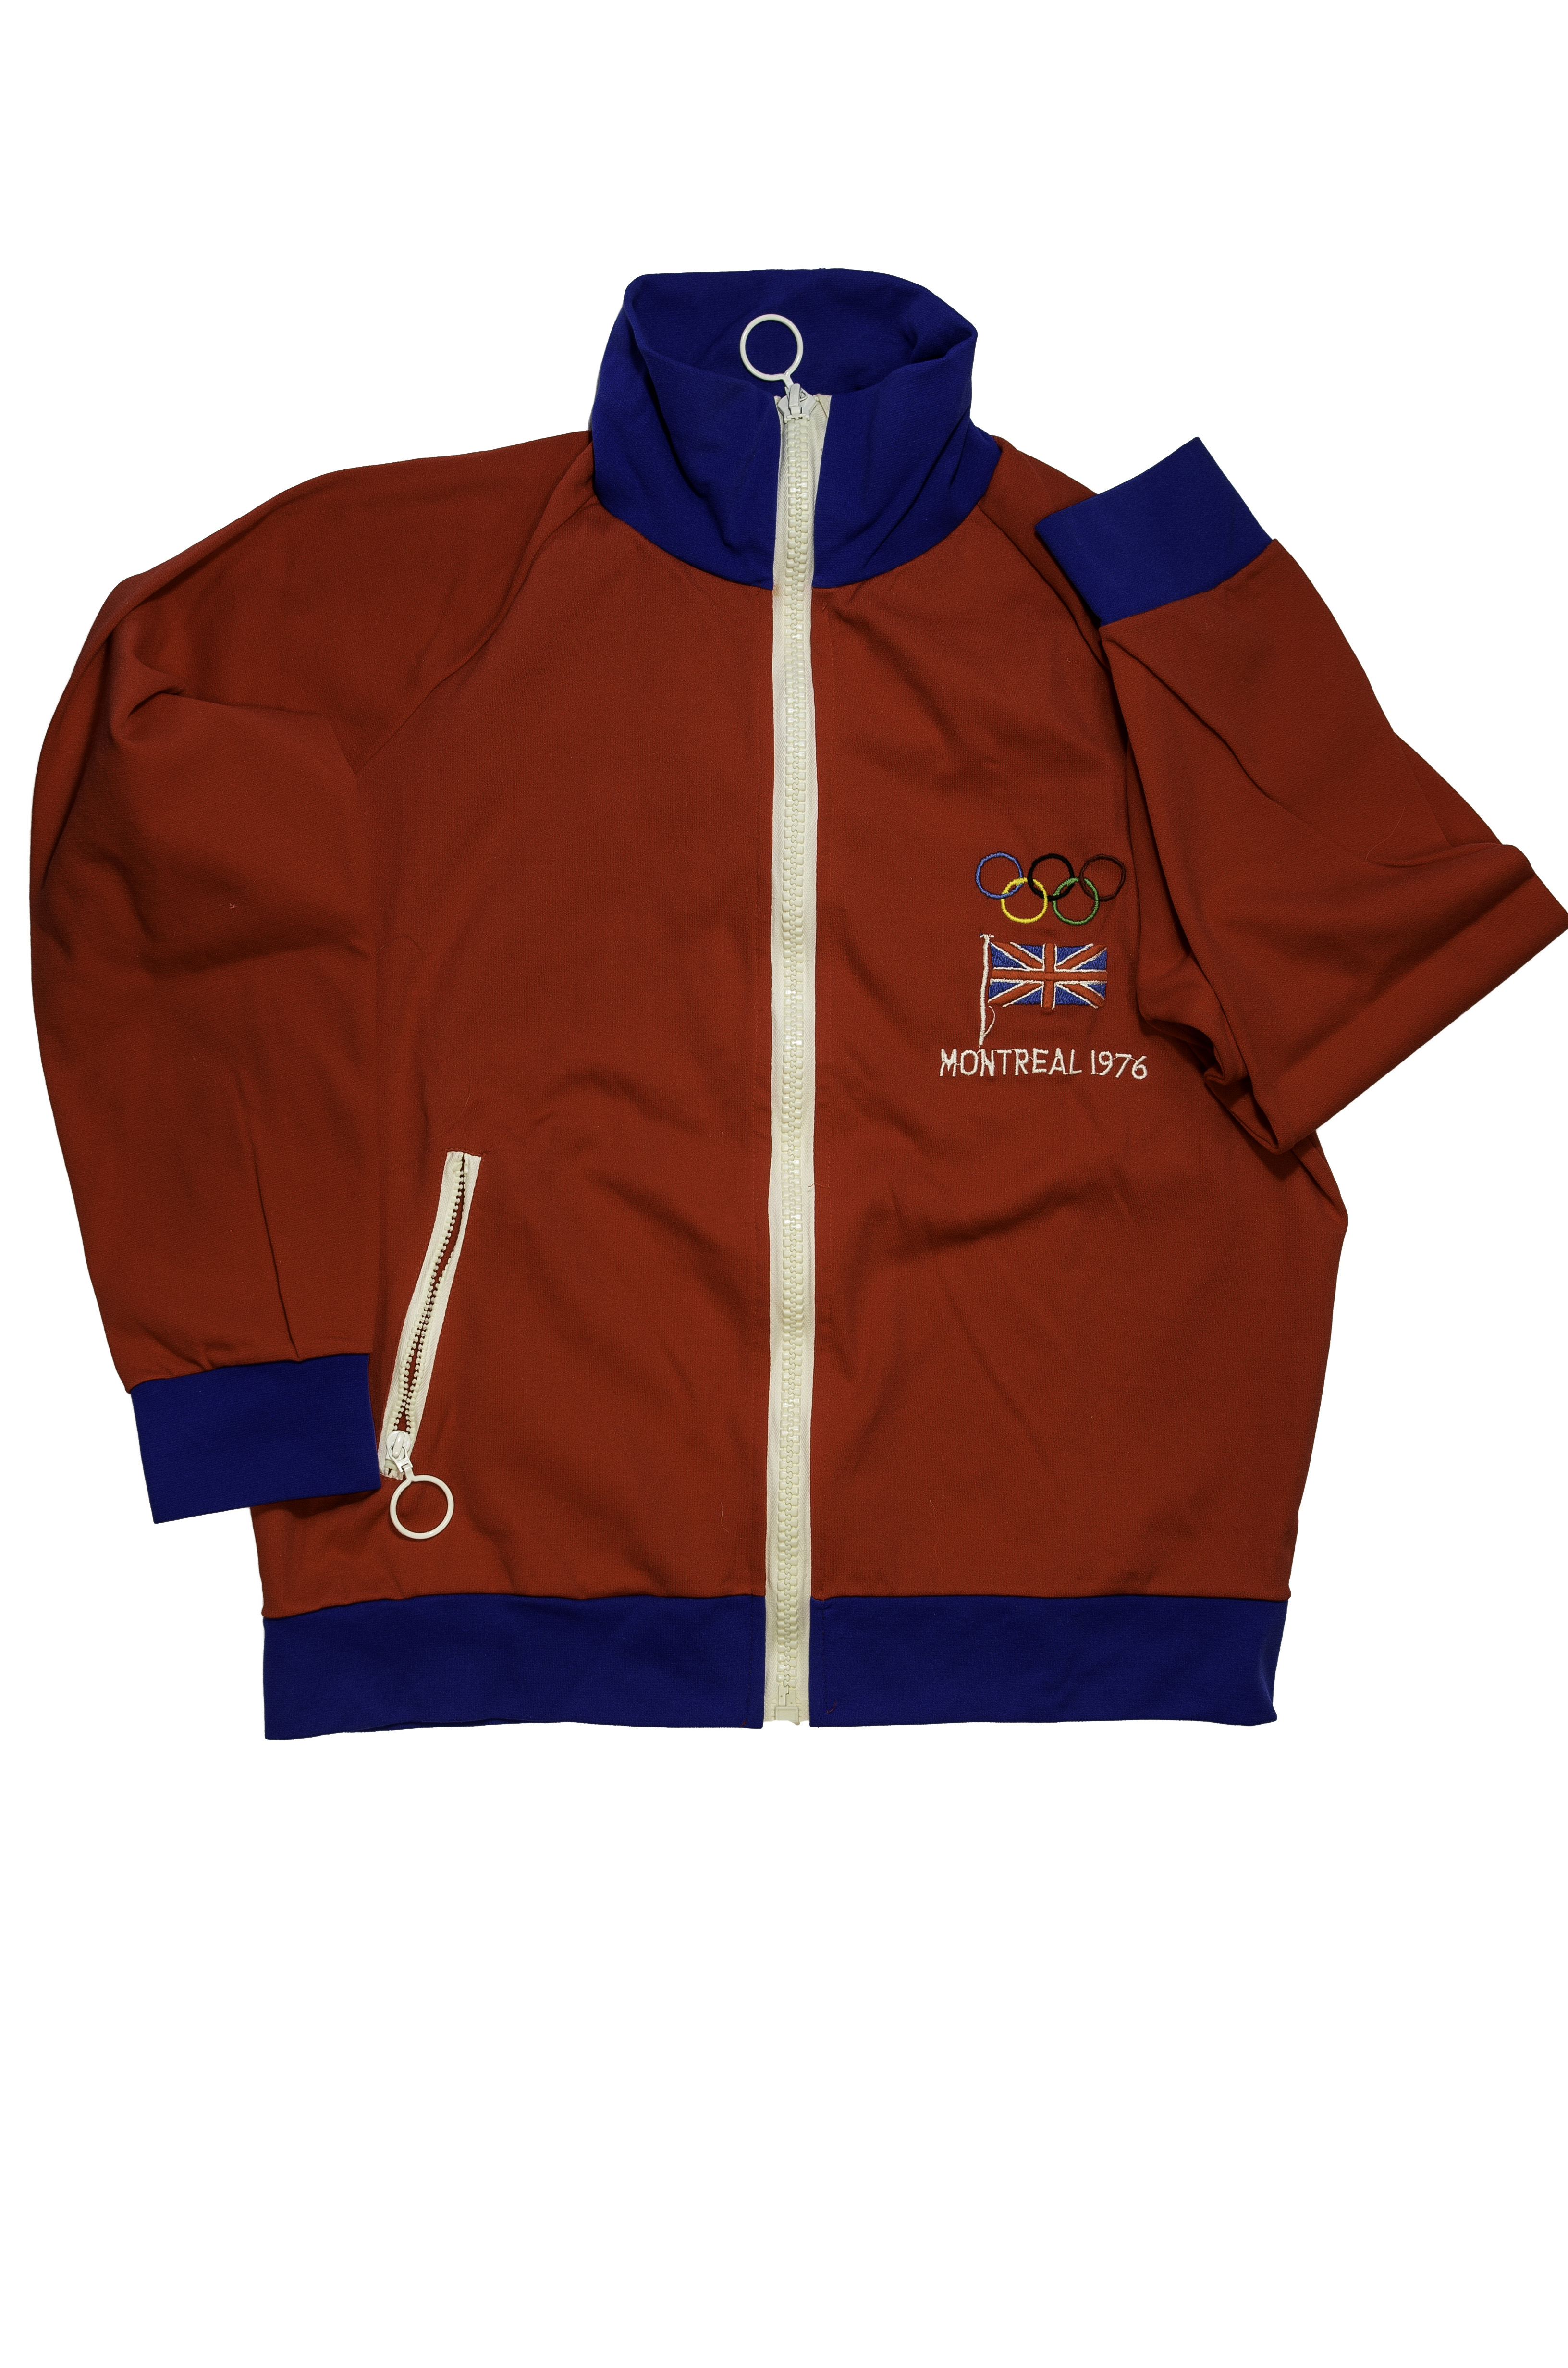 Official team track suit (red jacket with zipper) issued to modern pentathlete and competitor Andy Archibald, Olympic Games, Montreal, Canada, 18-22 July 1976.